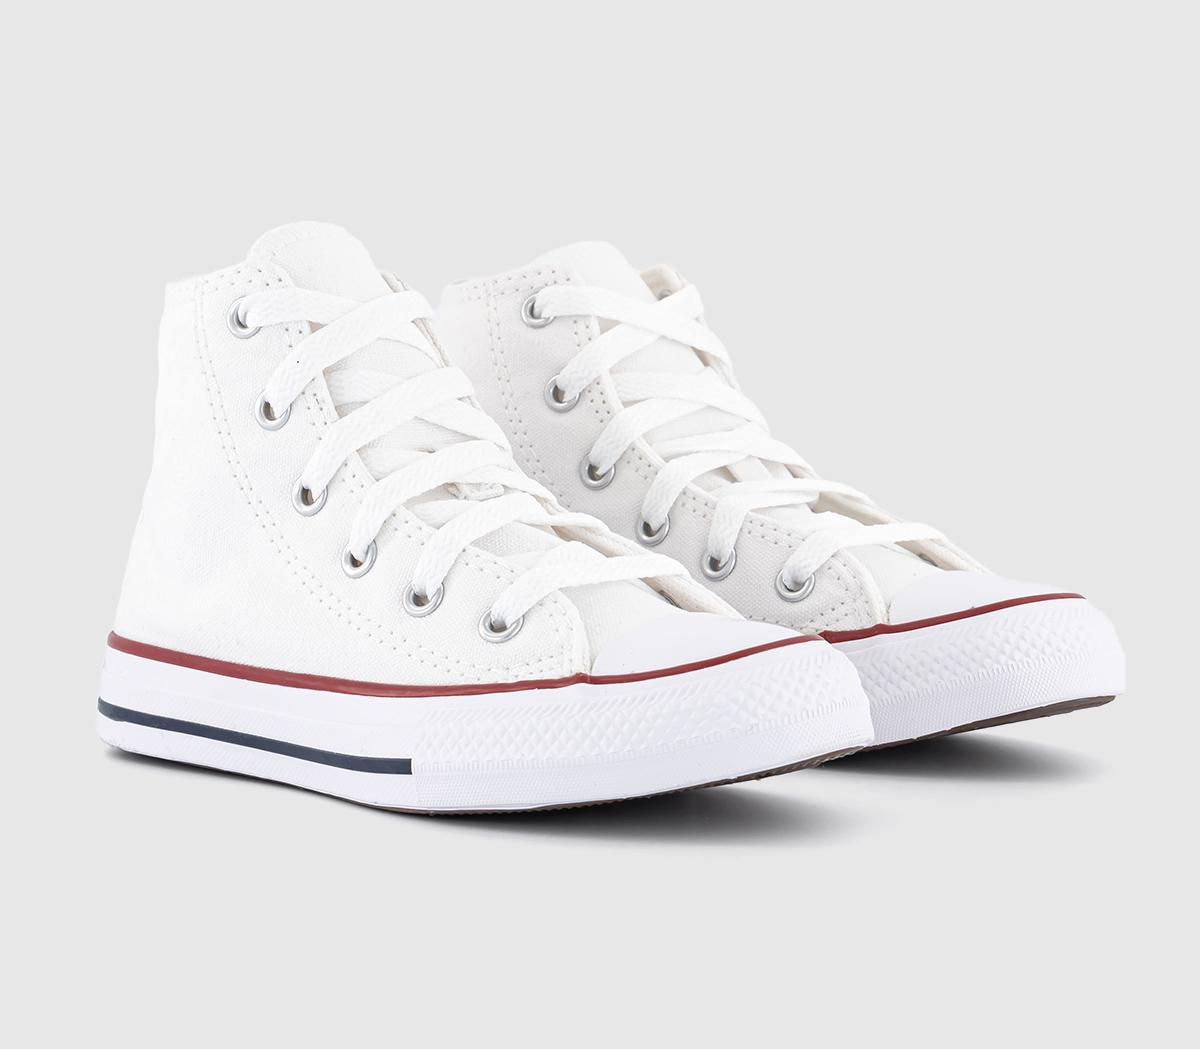 Converse Kids White All Star High Mid Sizes Optical Trainers, 11 Youth